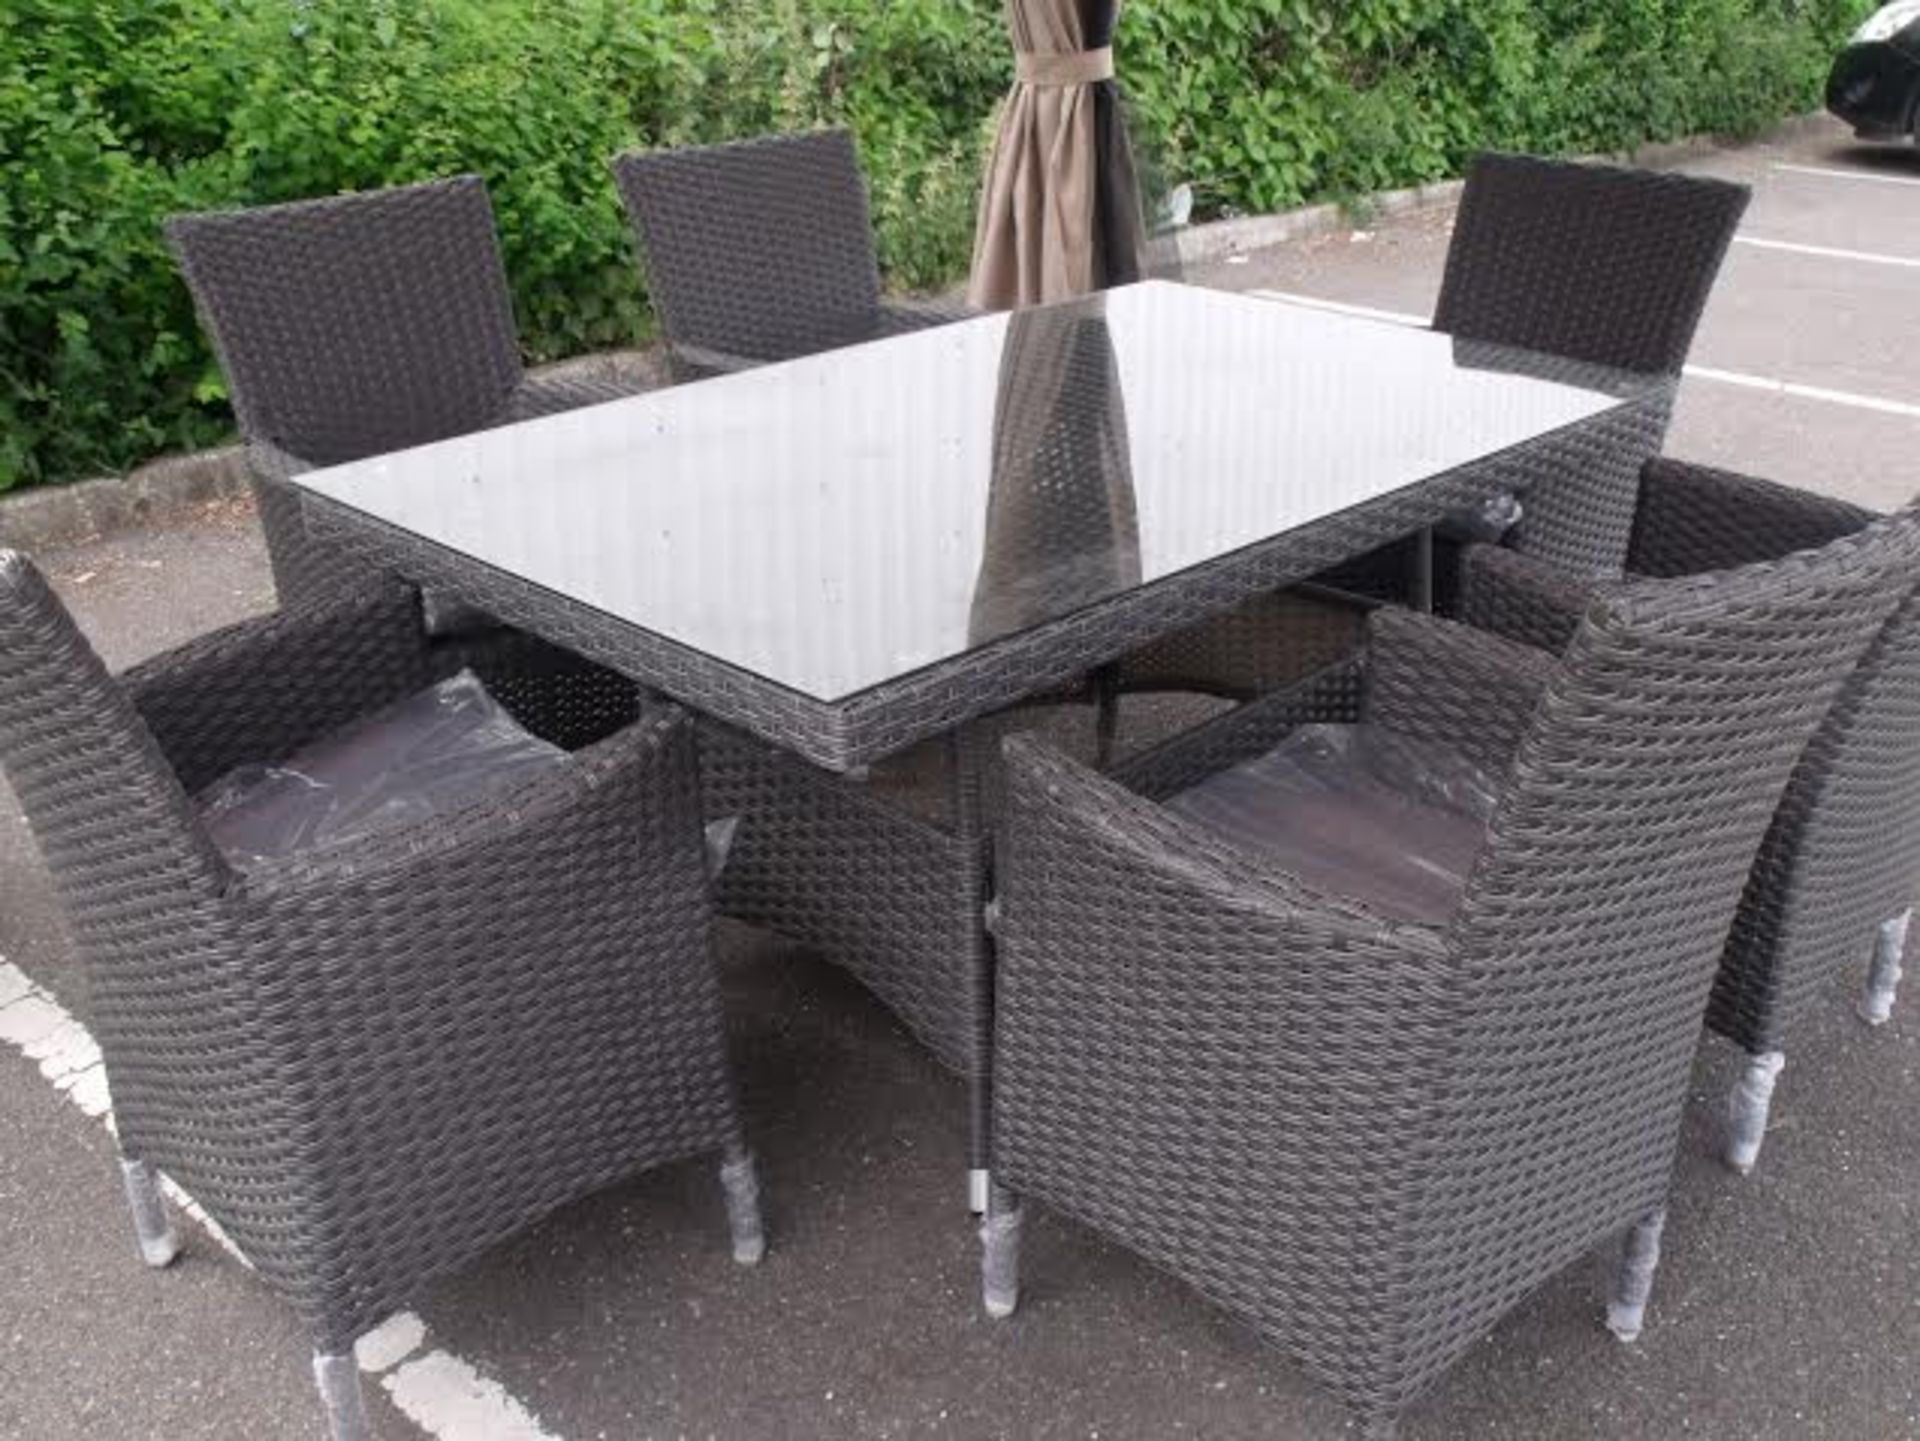 7 PIECE QUALITY RATTAN PATIO / DINING SET MULTI GREY ALL WEATHER PU RATTAN WITH CONTRASTING GREY